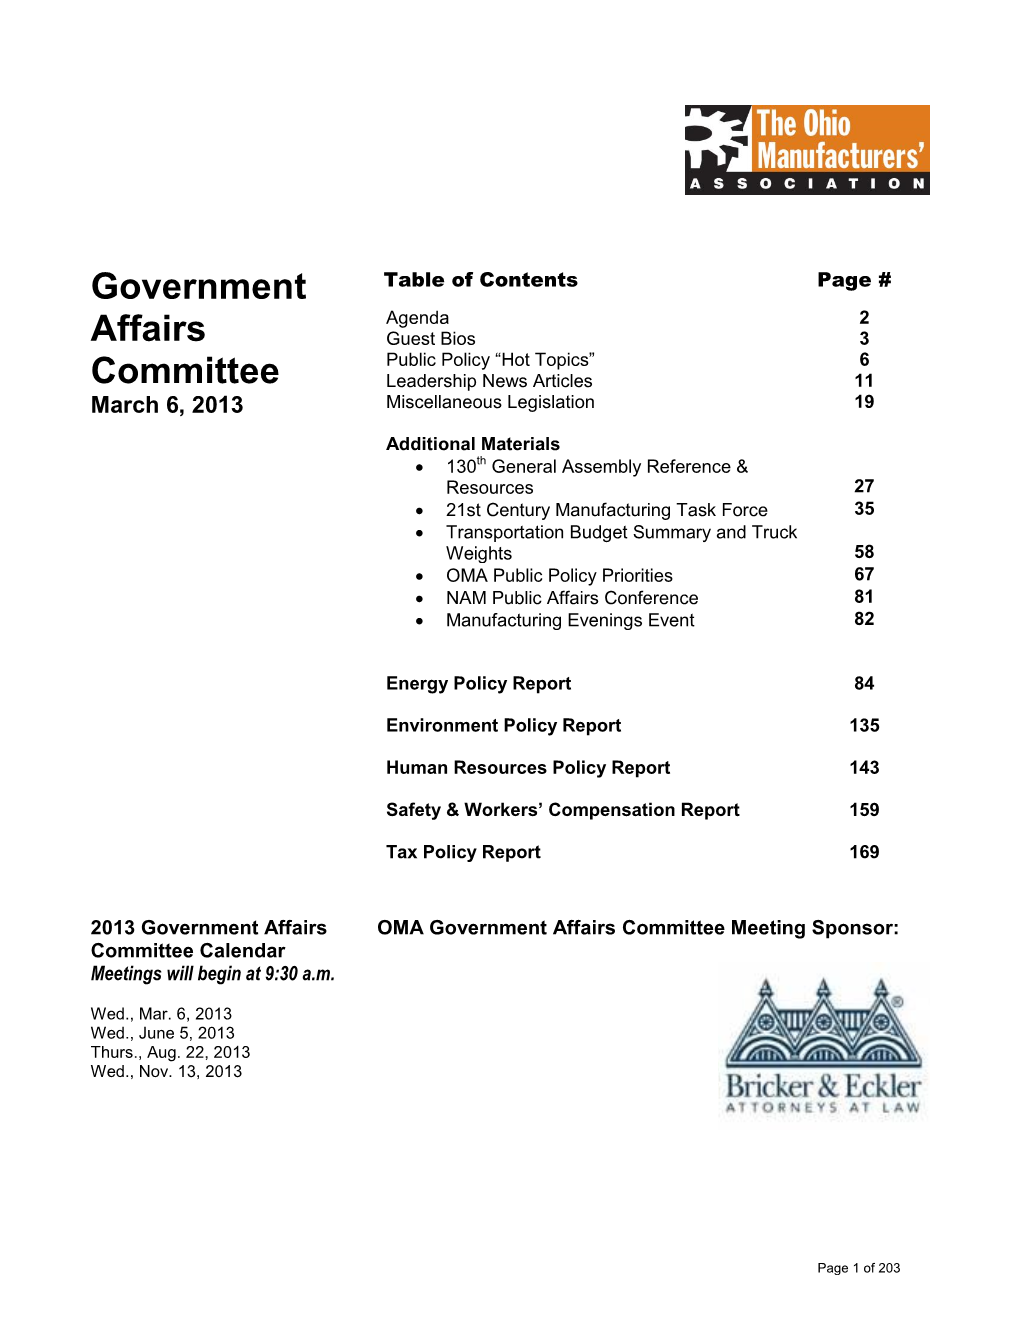 Government Affairs Committee Meeting Sponsor: Committee Calendar Meetings Will Begin at 9:30 A.M